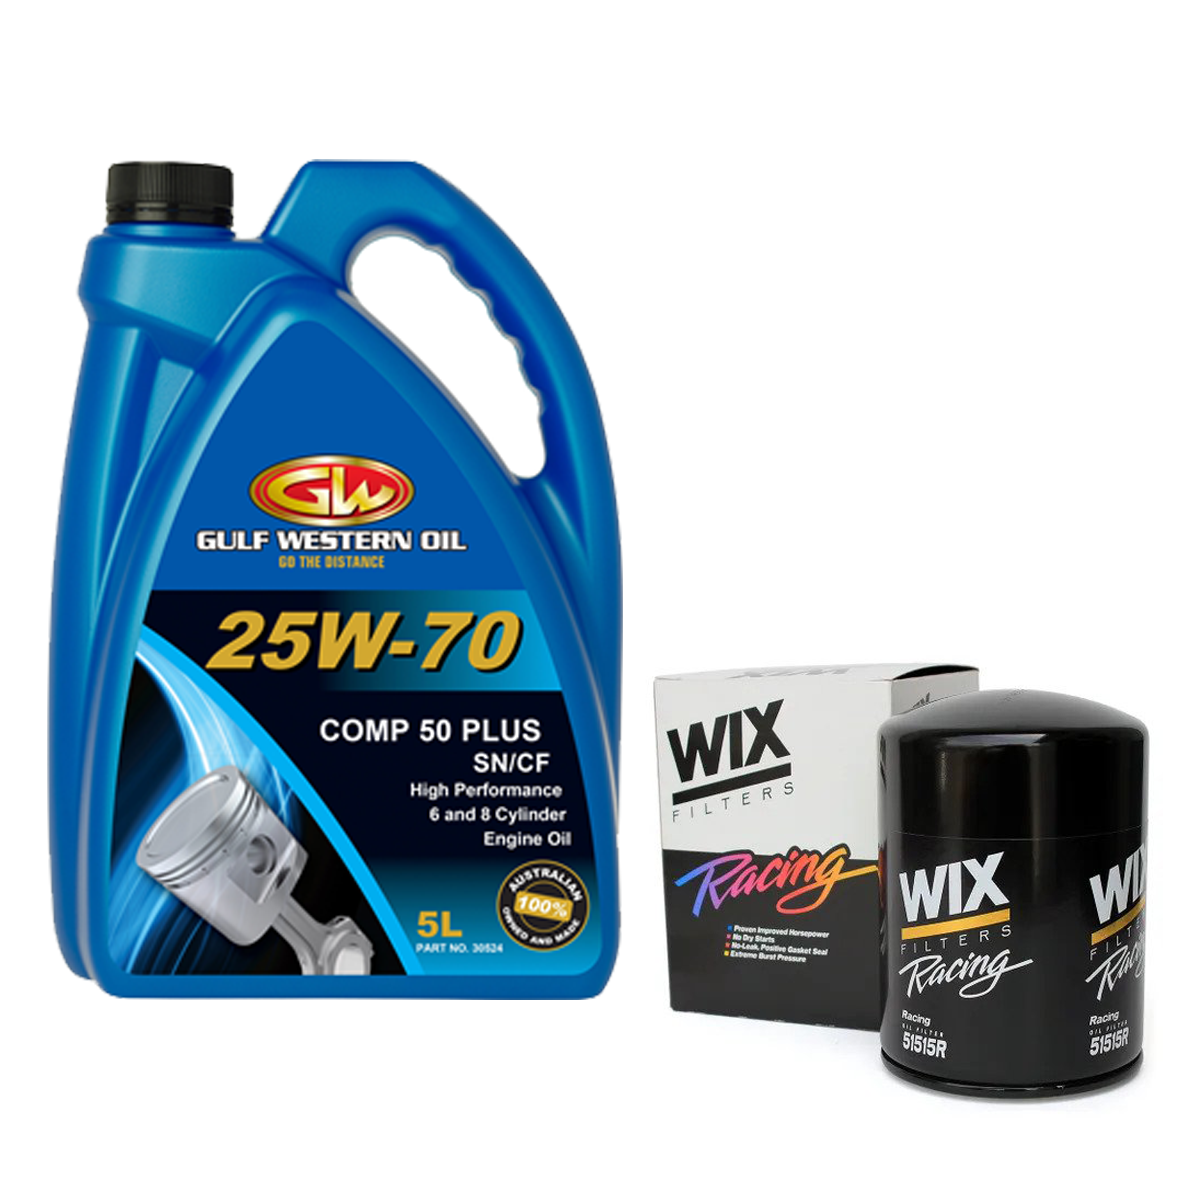 Oils, Lubricants & Filters